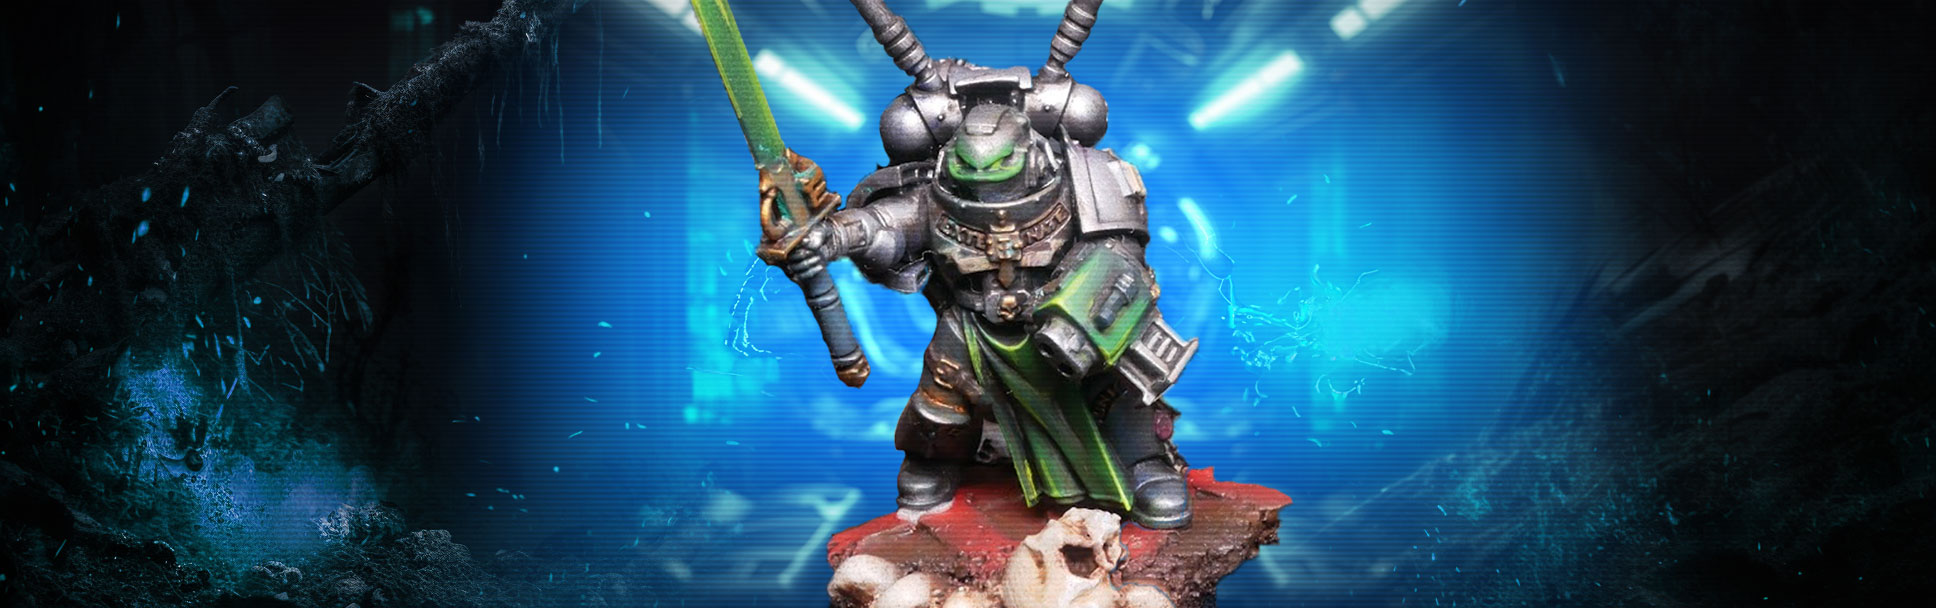 Grey Knights Archives - The Art of War 40K